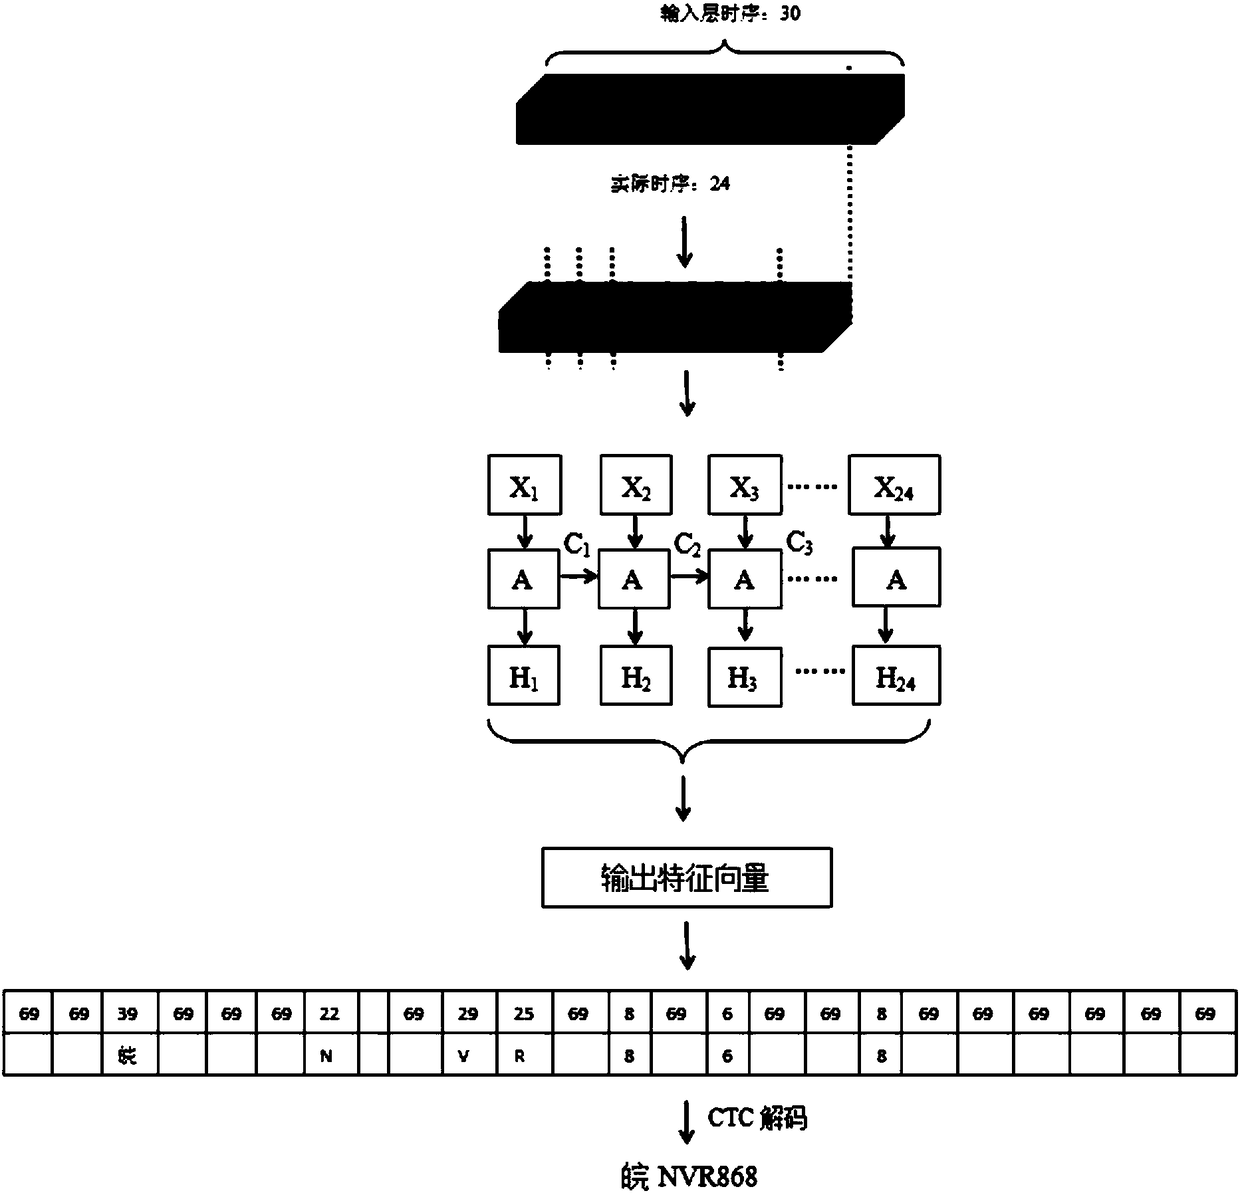 Dynamic time sequence convolutional neural network-based license plate recognition method